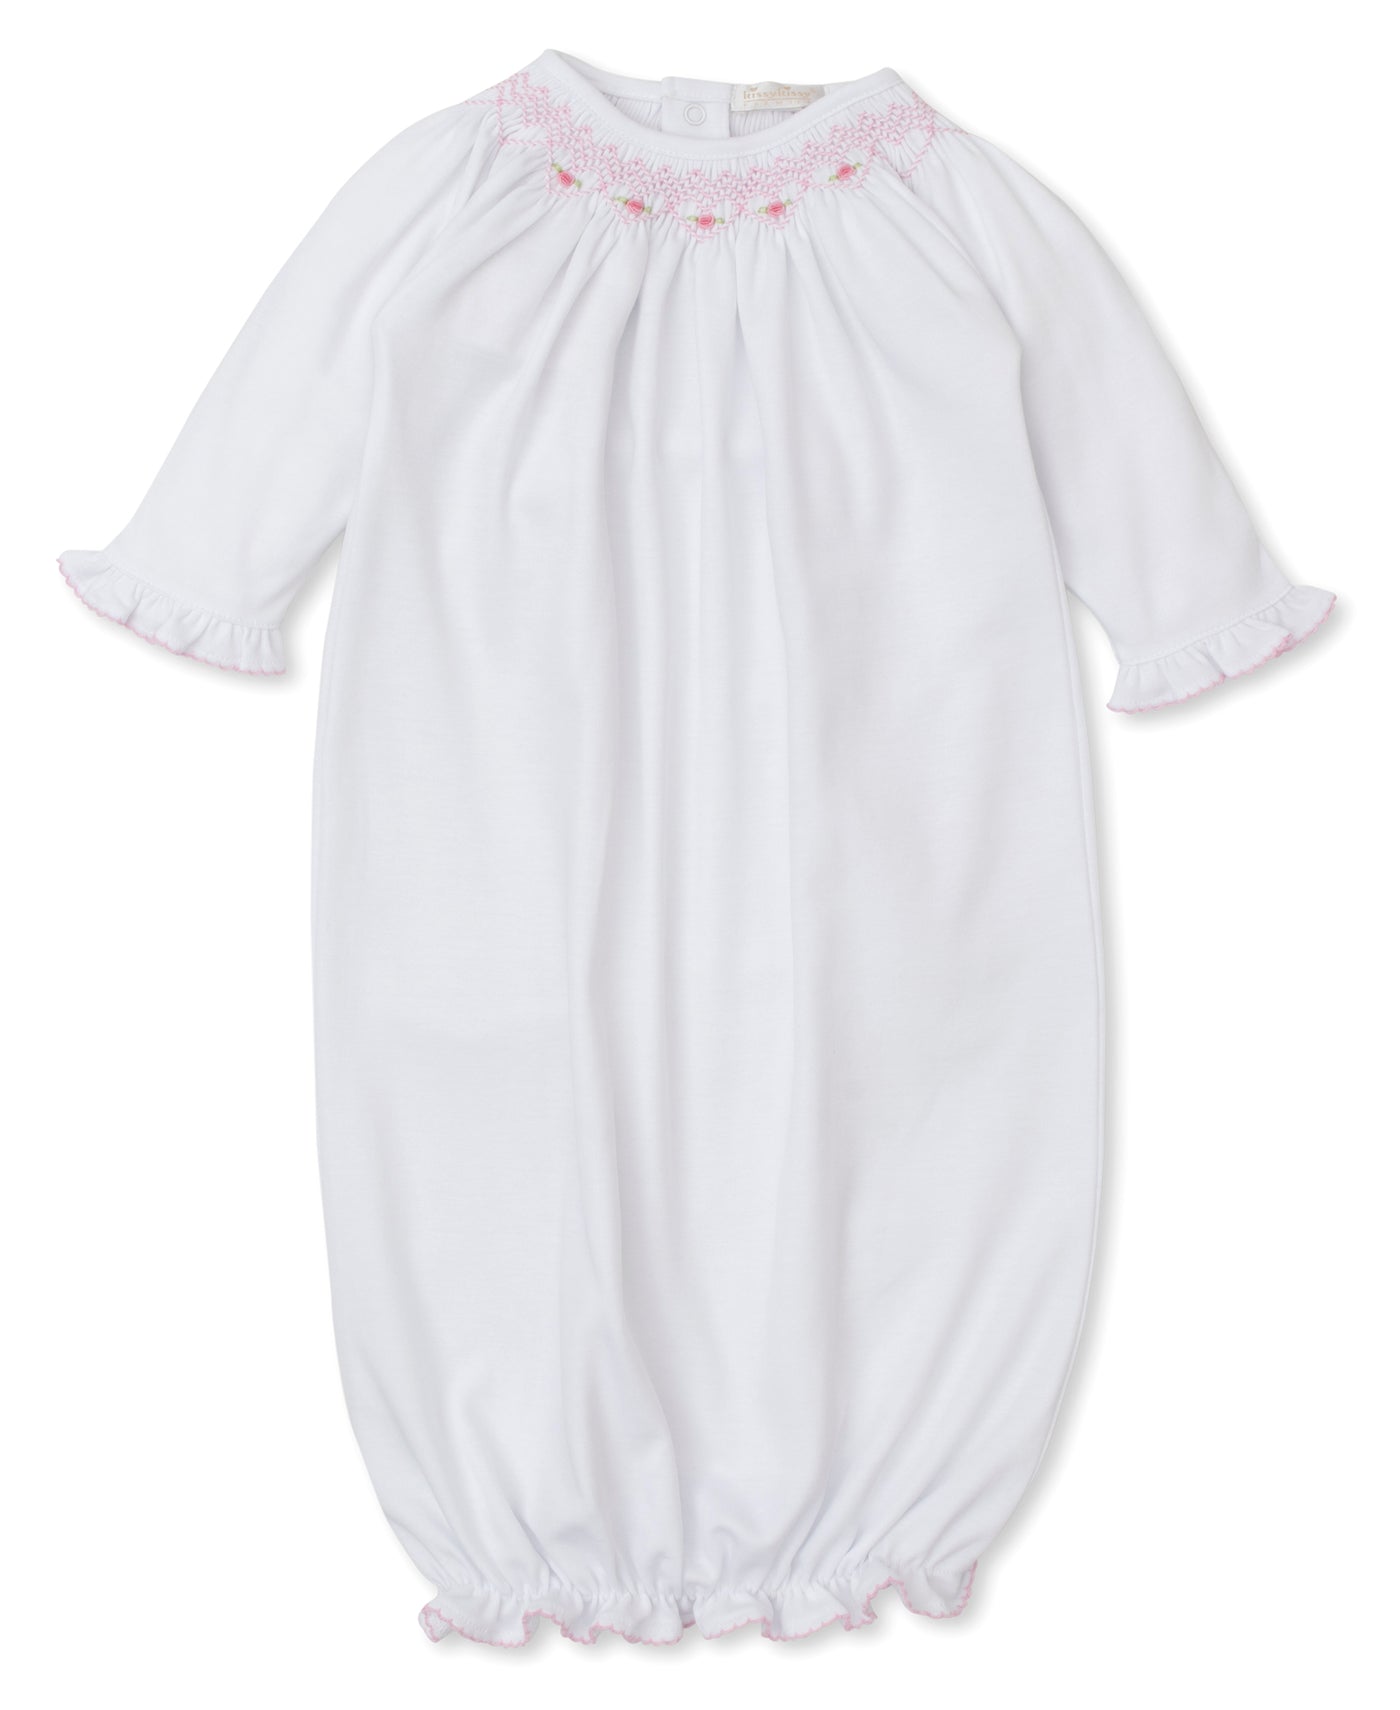 Premier Hand Smocked Gown - White/Pink